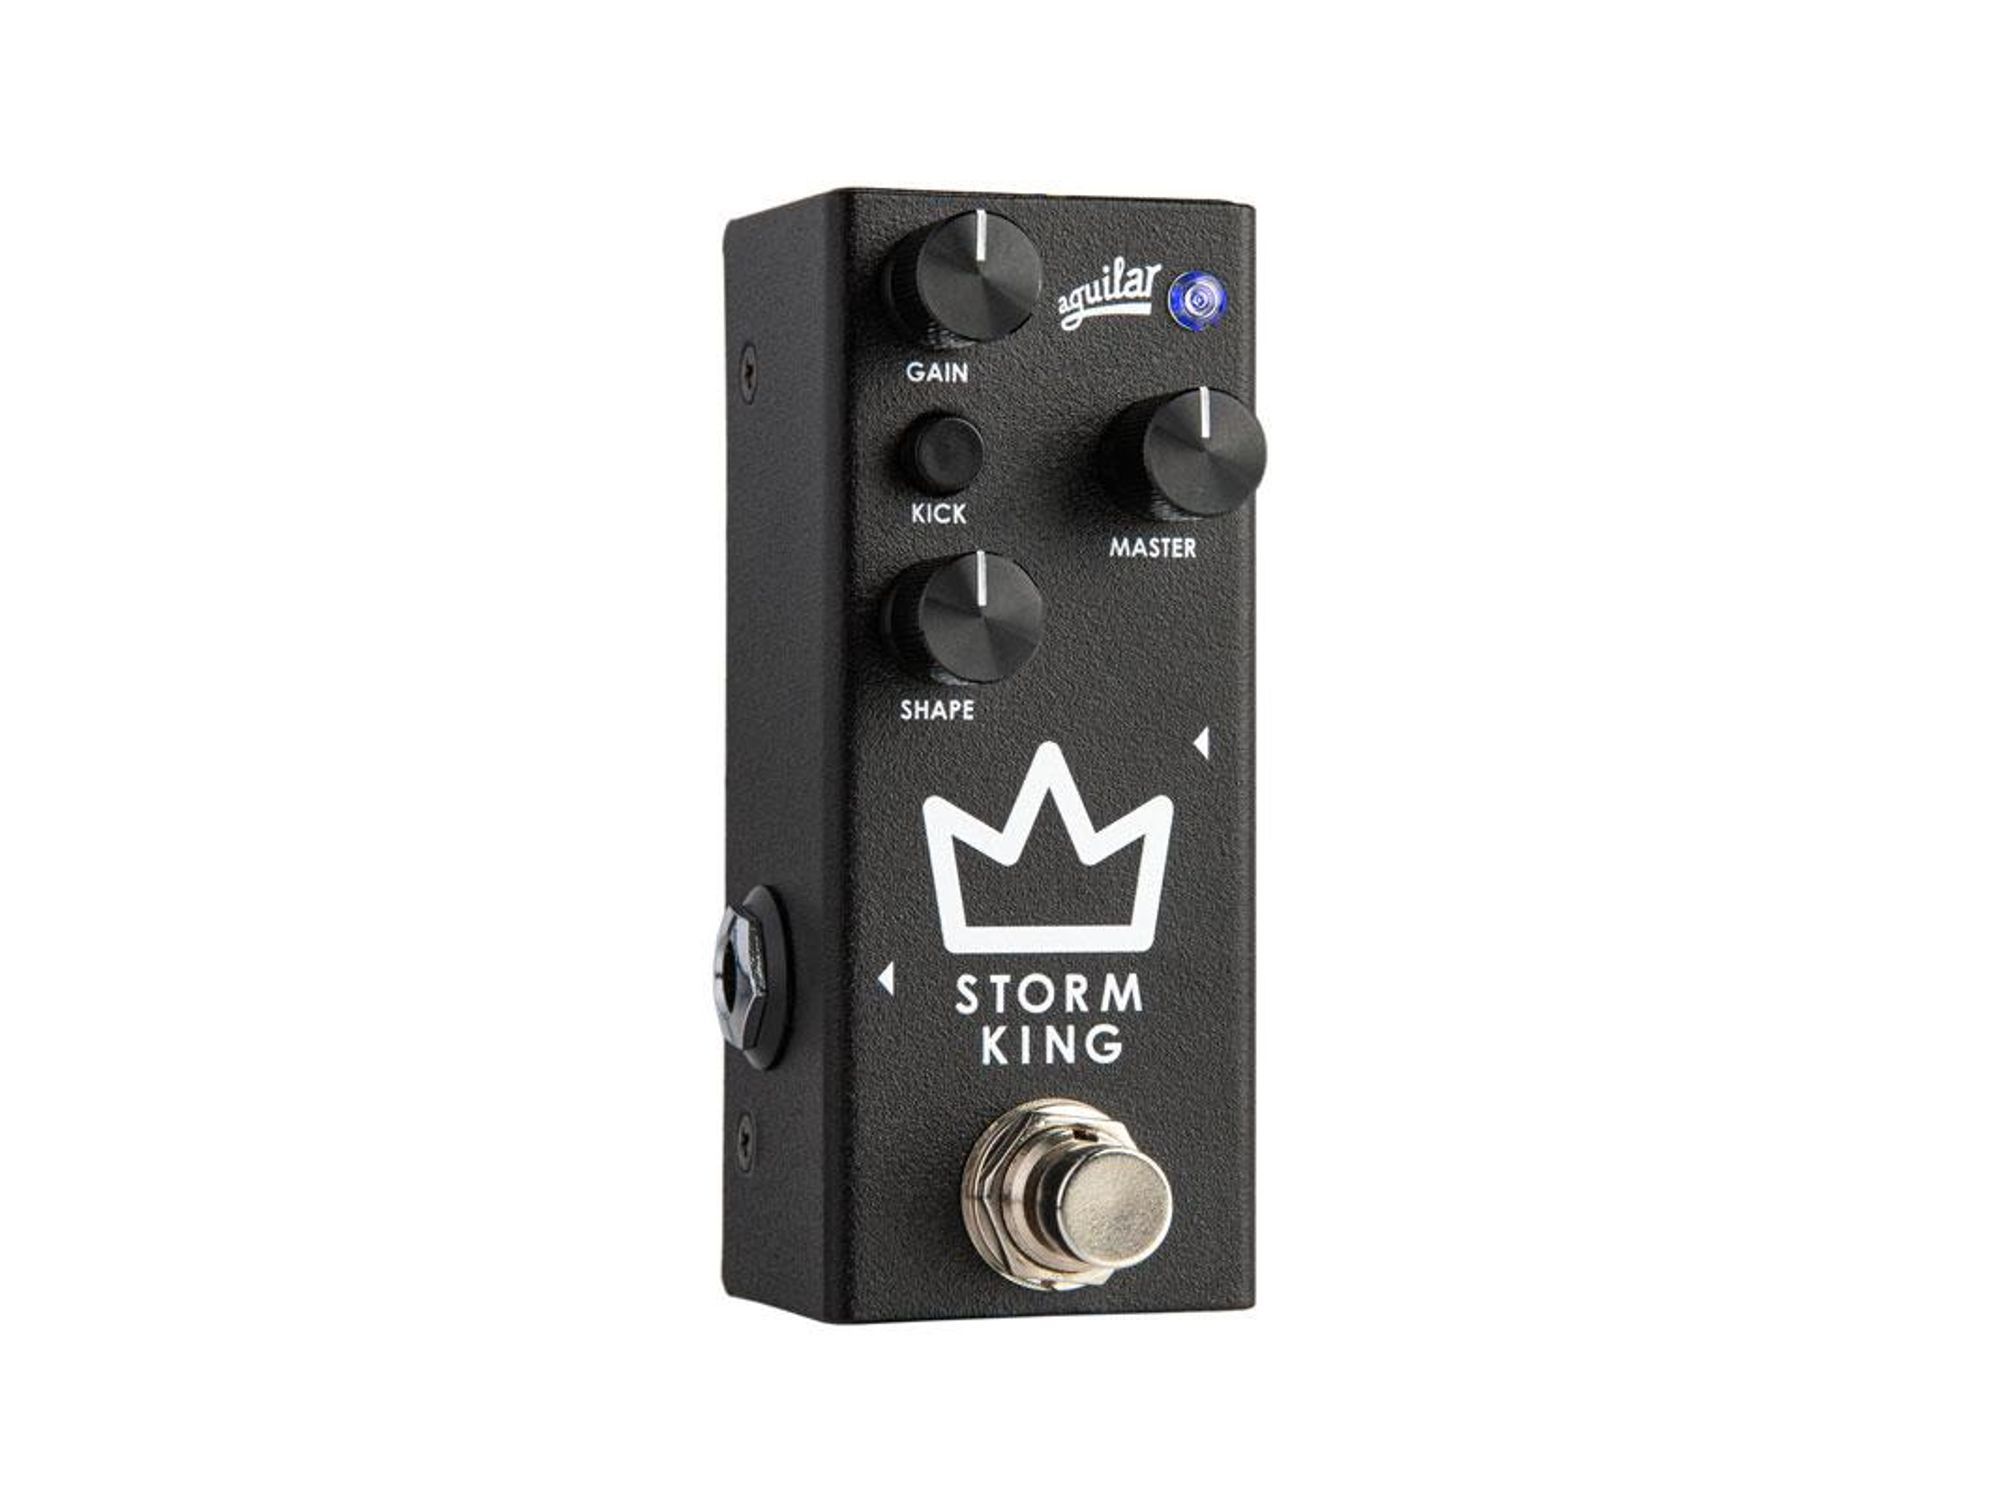 Aguilar Introduces the Storm King Distortion/Fuzz